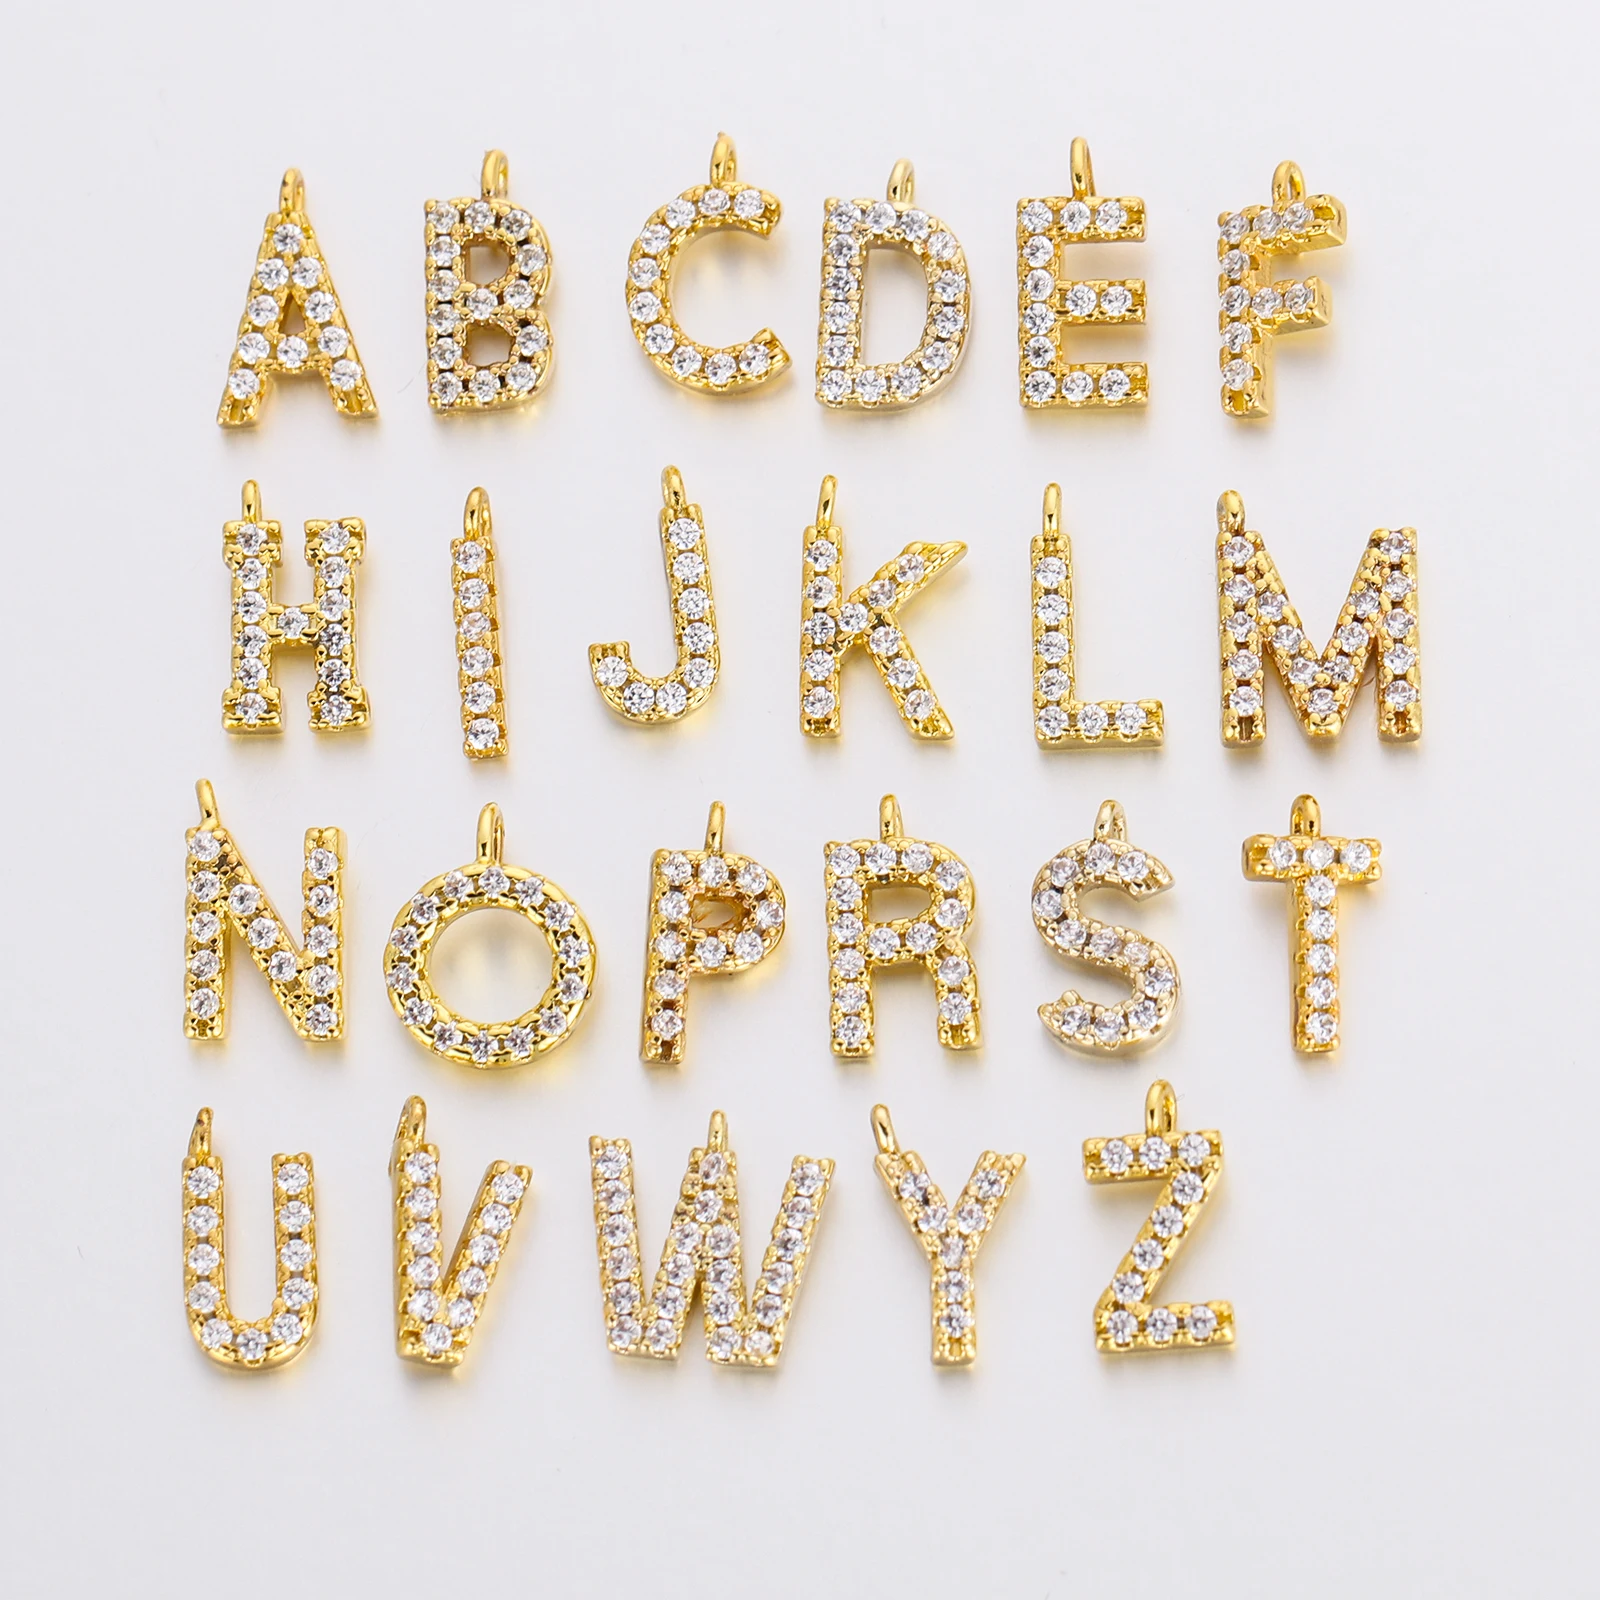 Personalized A B C D E F G H I J K L M N O P Q R S T U V W X Y Z 26 Accessories Alphabet Letter  Necklace Pendant With Initial